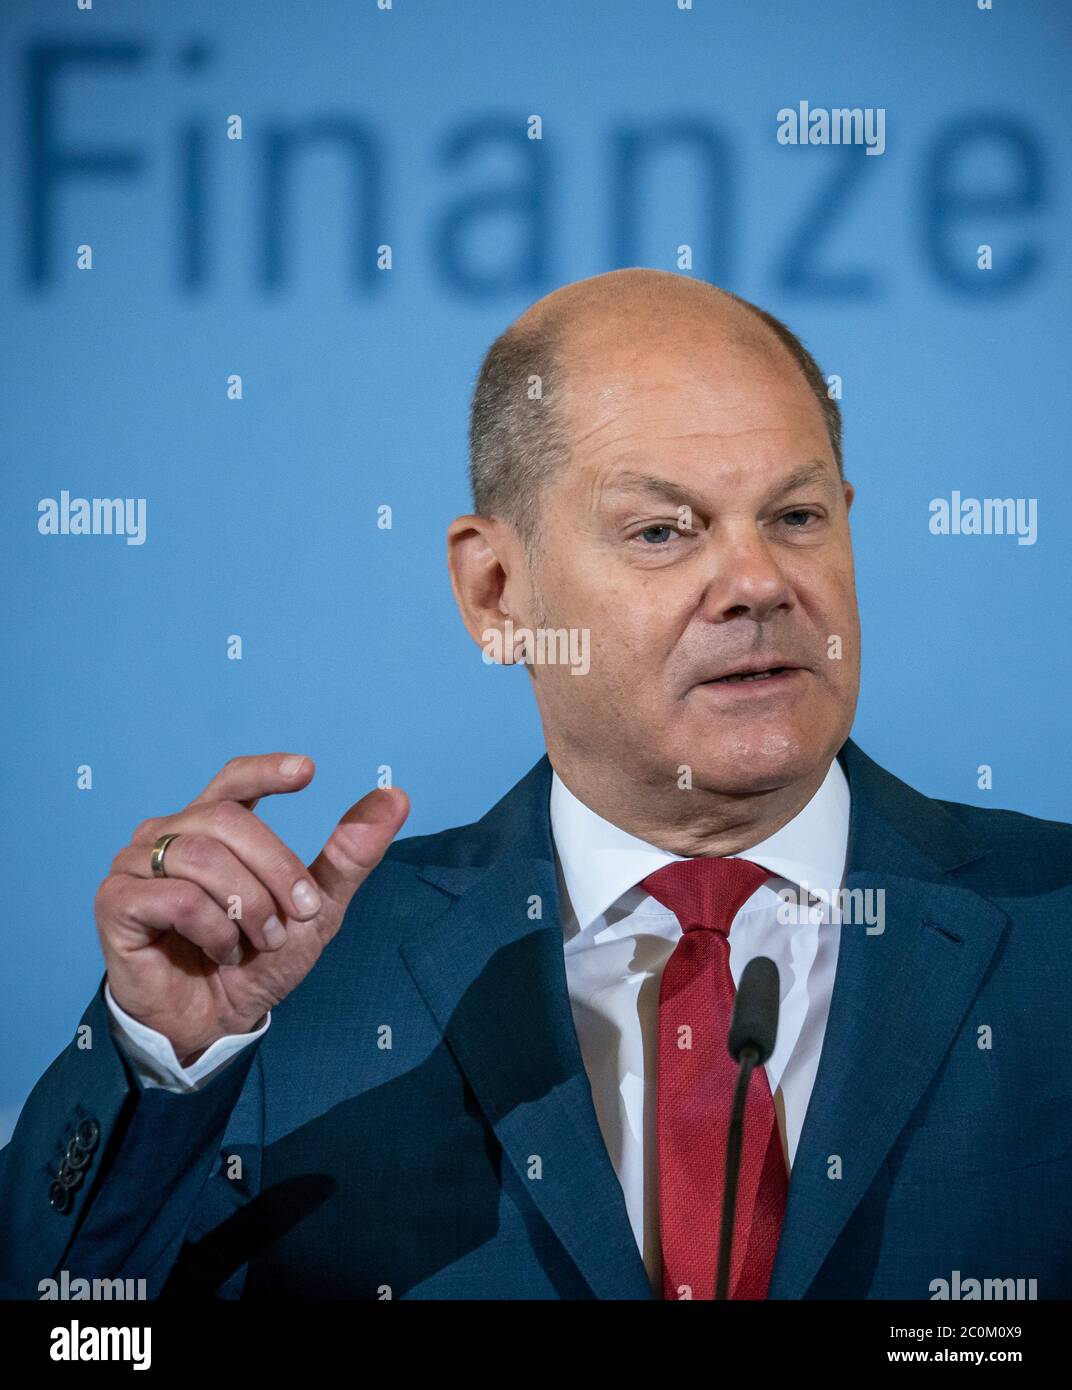 Berlin, Germany. 12th June, 2020. Olaf Scholz (SPD), Federal Minister of Finance, speaks at a press conference on the economic stimulus package in the context of the Corona aid. Credit: Michael Kappeler/dpa/Alamy Live News Stock Photo